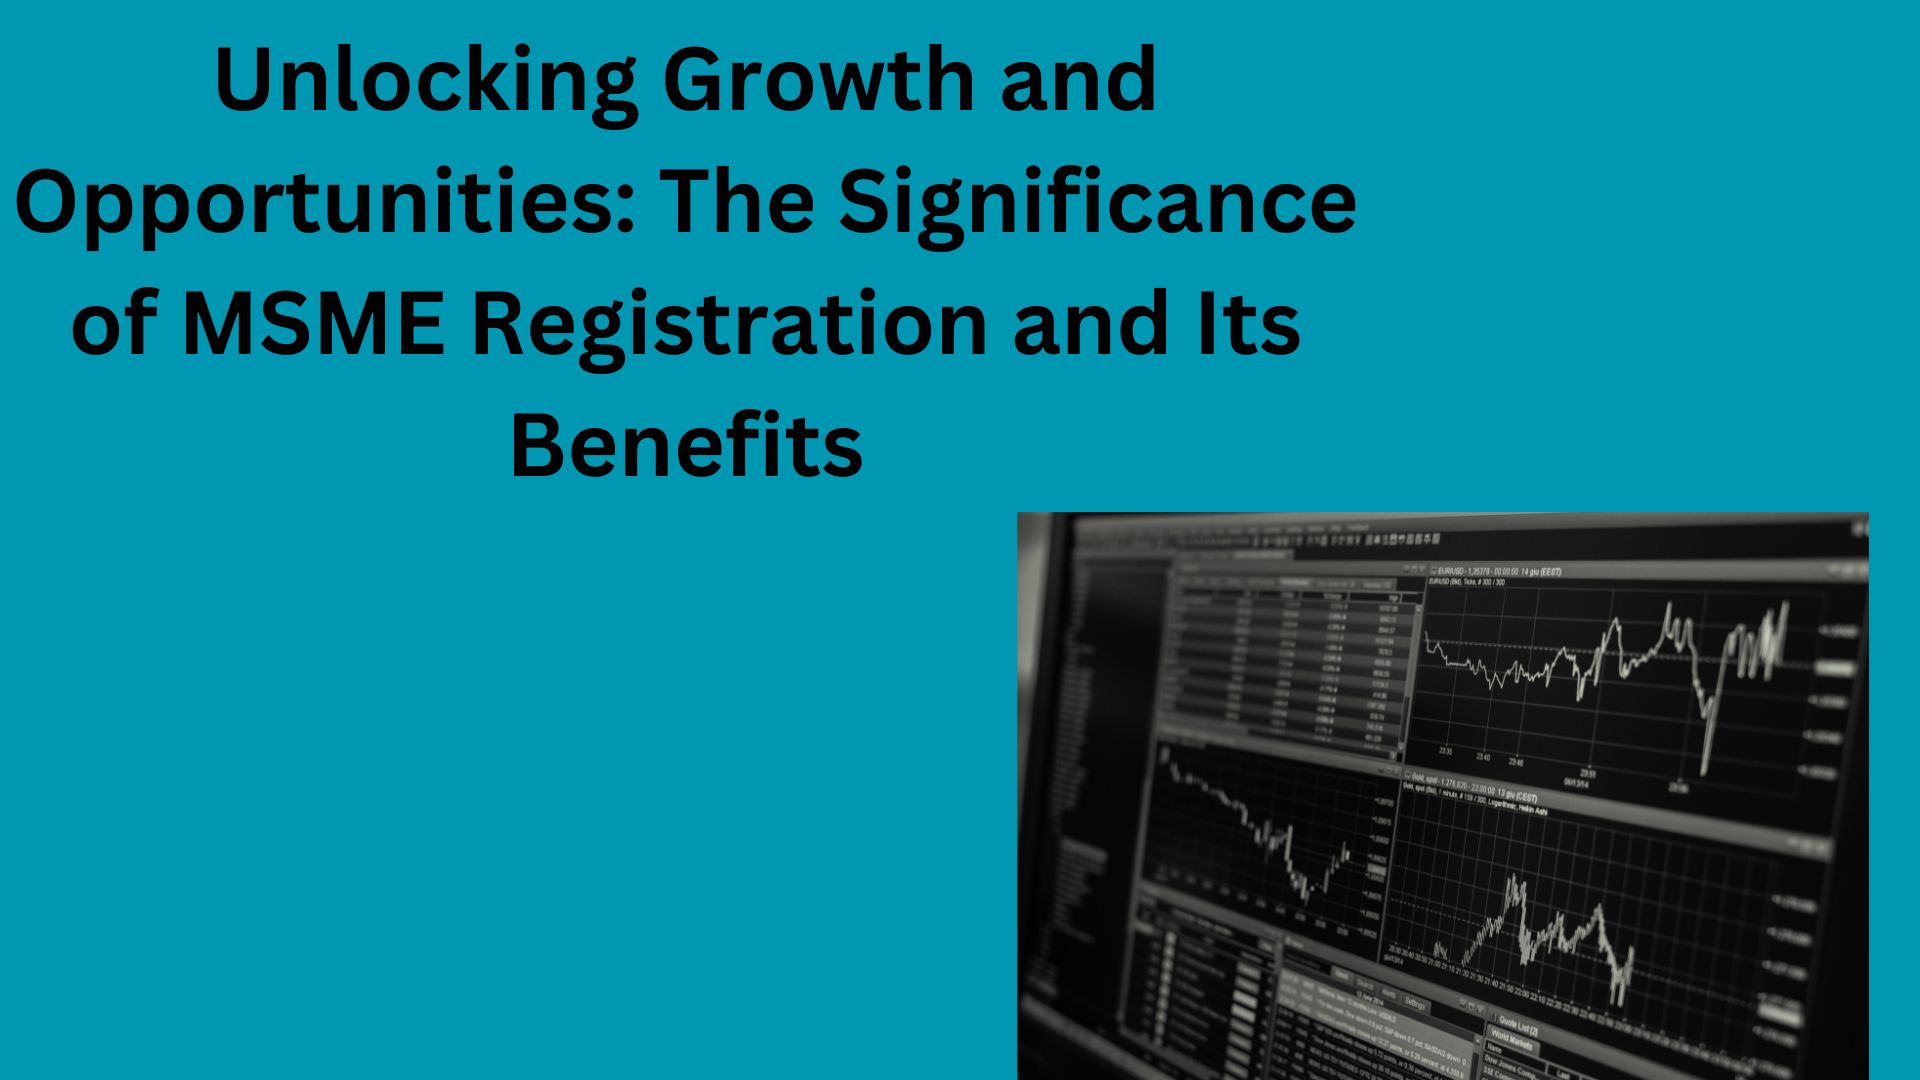 Unlocking Growth and Opportunities: The Significance of MSME Registration and Its Benefits